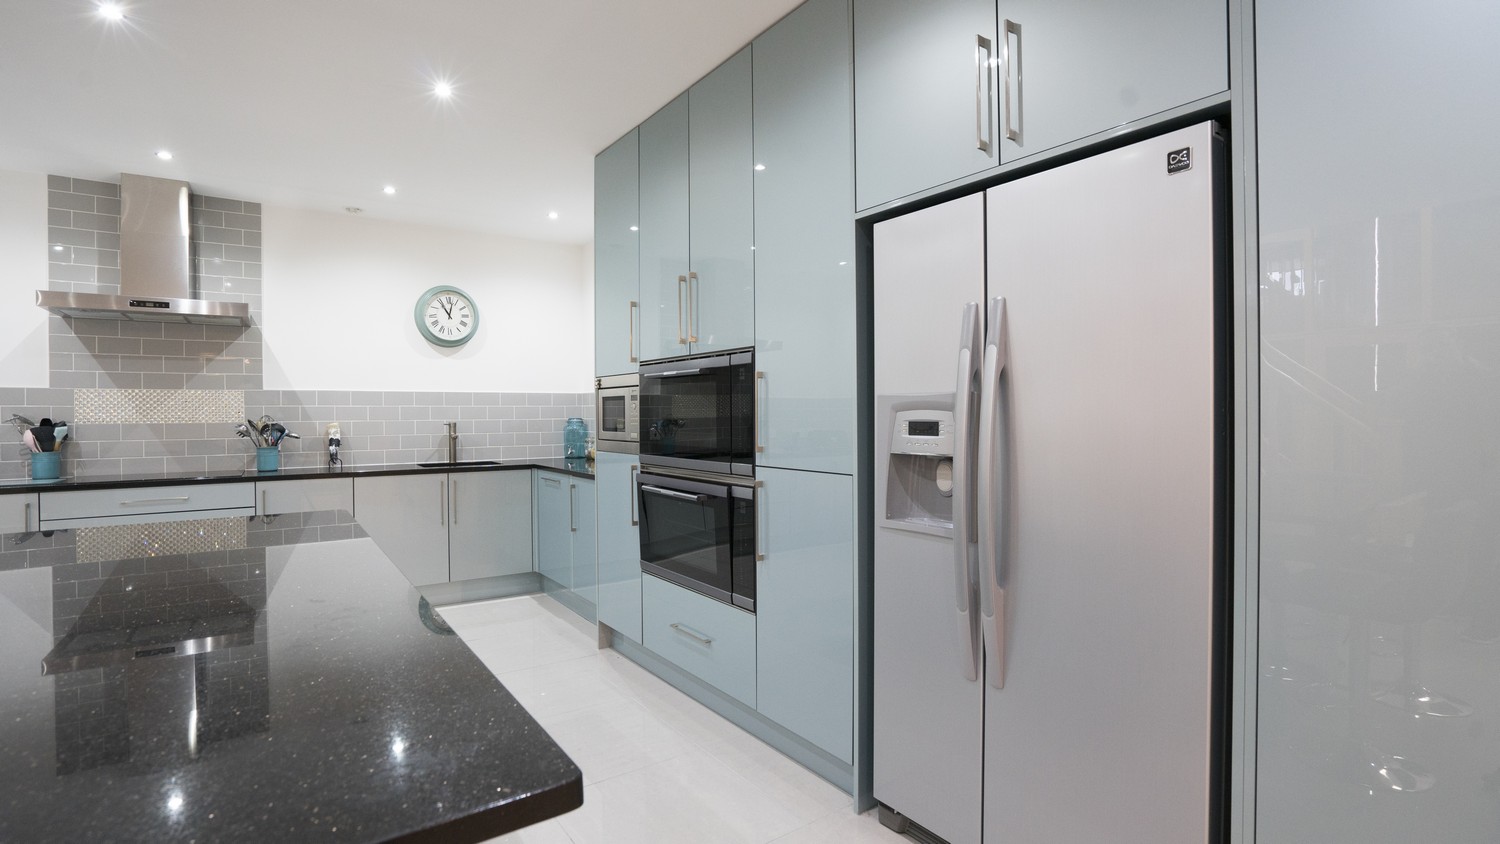 Floor to ceiling feature larder units with integrated appliances and large fridge/freezer.